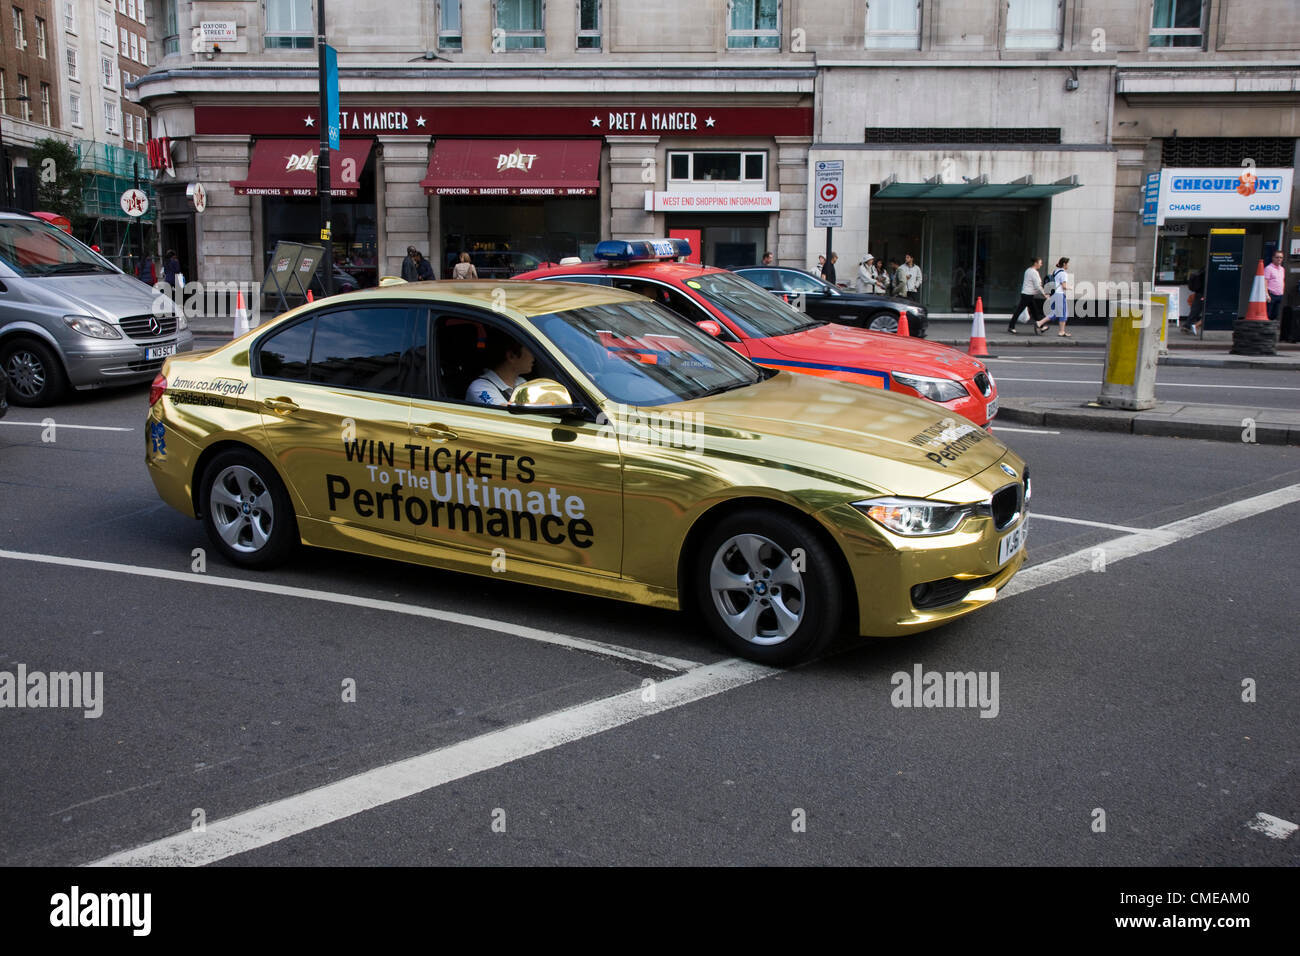 Promotional gold BMW car with London 2012 Olympic logos. A policeman talks to the driver stopped at traffic lights. Stock Photo